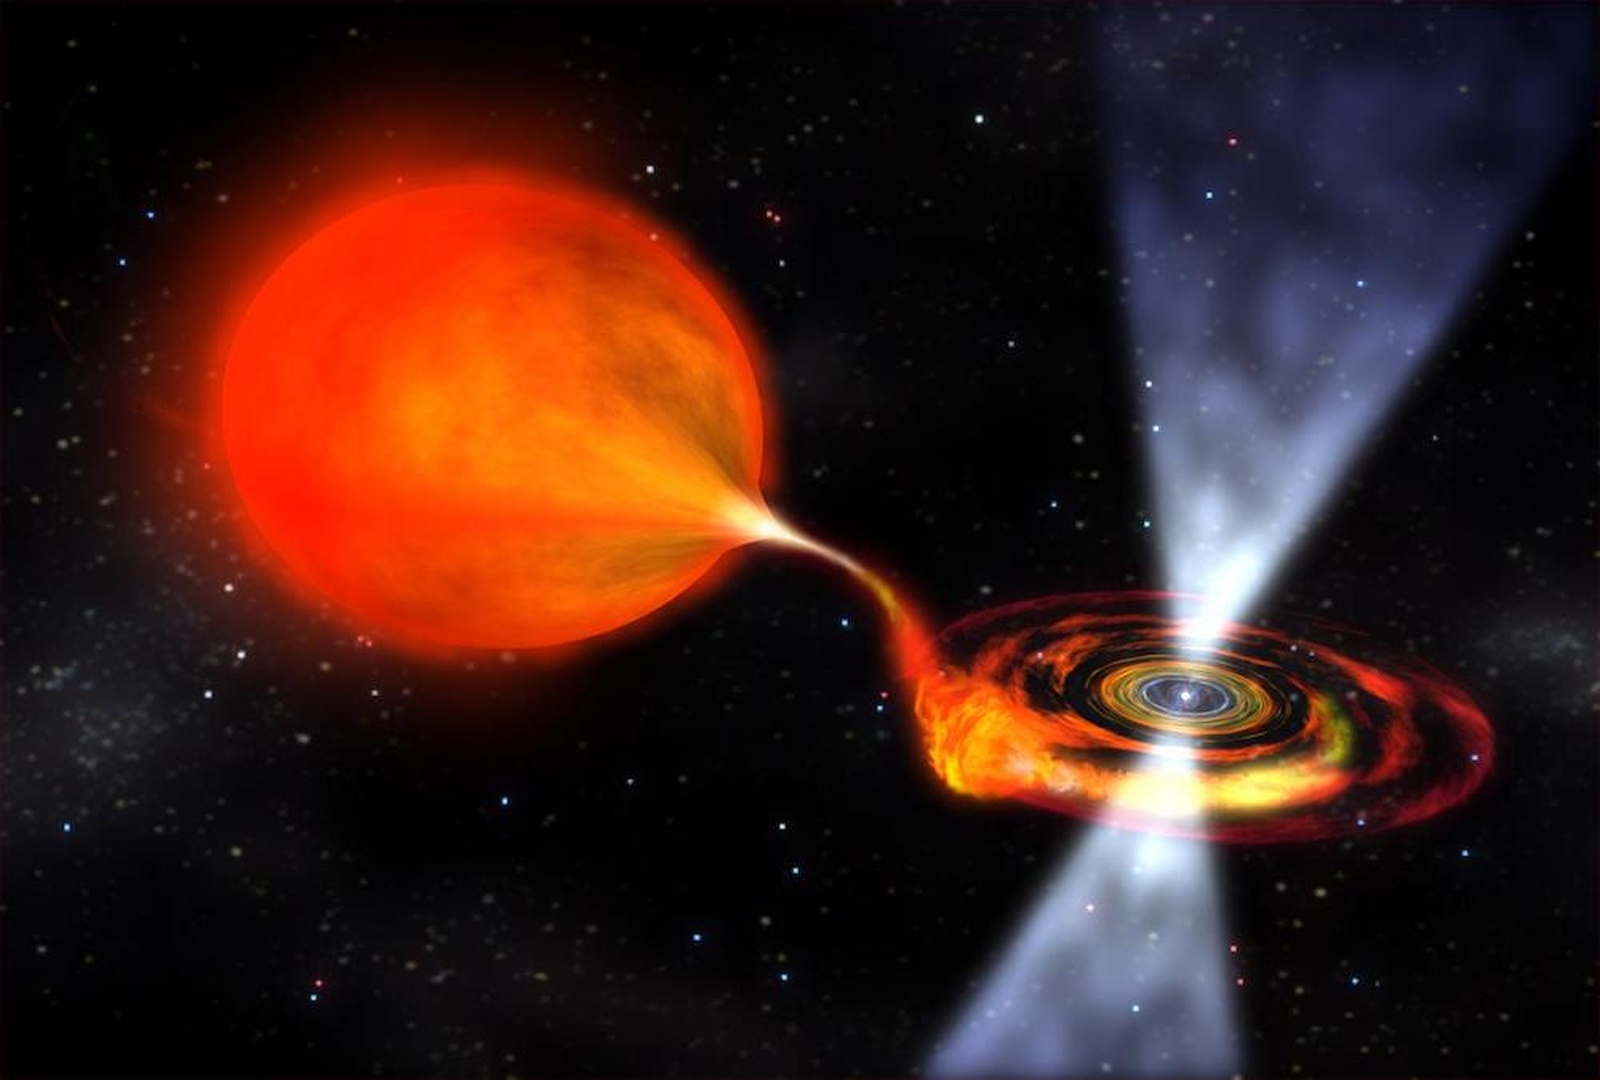 The star, which exploded as a supernova named iPTF 14gqr, seems to have a neutron star accompanying it, which had stolen material with its gravitational force. The illustration shows the flow of matter from a normal star to a neutron star. Source: NASA